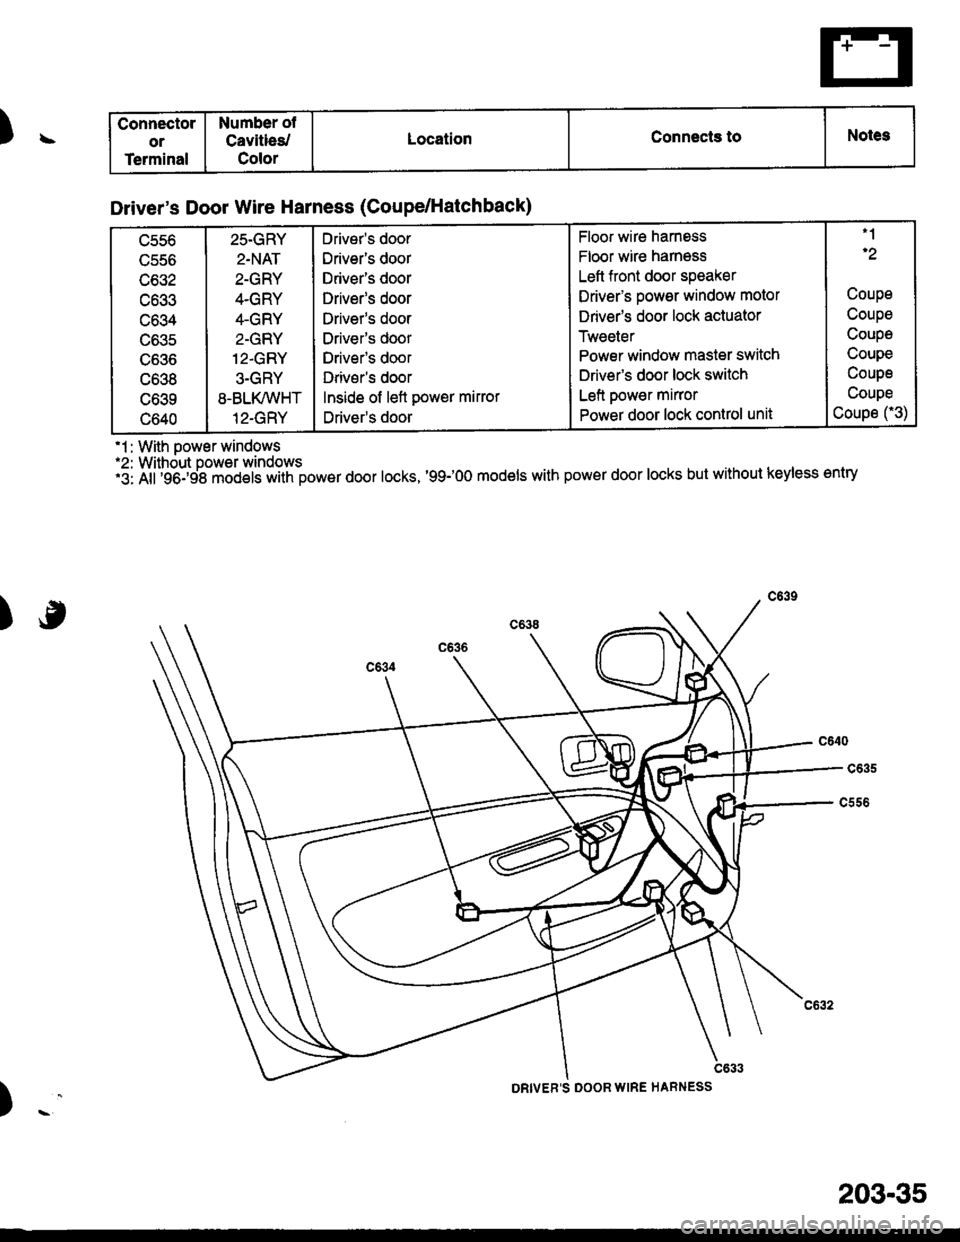 HONDA CIVIC 1996 6.G Owners Guide )\
.1 : With oower windows*2: Without power windows.5 nii;gO: Sle models with power door locks, 99-OO models with power door locks but without keyless entry
)
Connector
or
Terminal
Number ot
Cavit